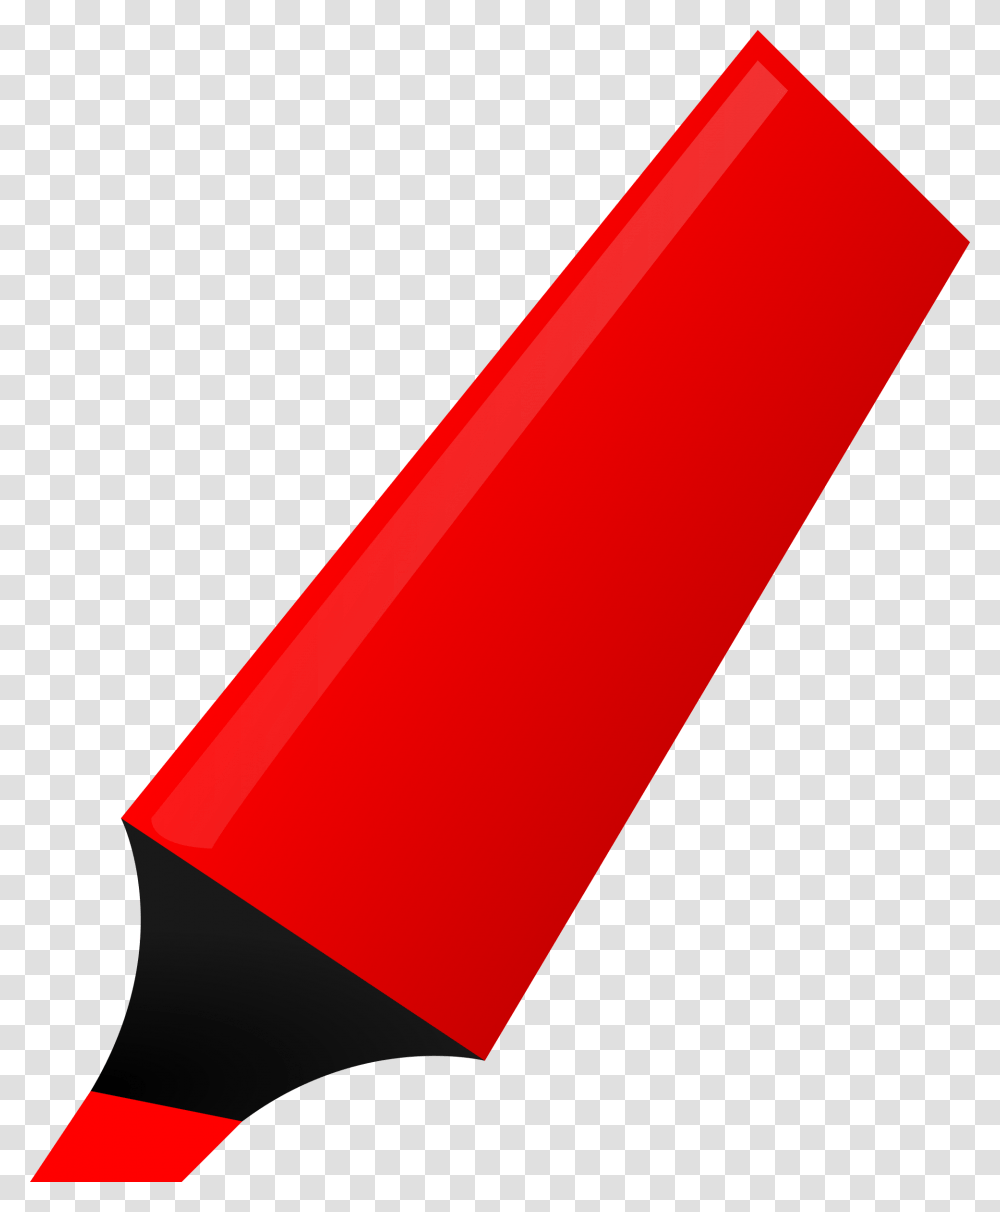 Red Highlighter Icons, Fashion, Red Carpet, Premiere, Red Carpet Premiere Transparent Png